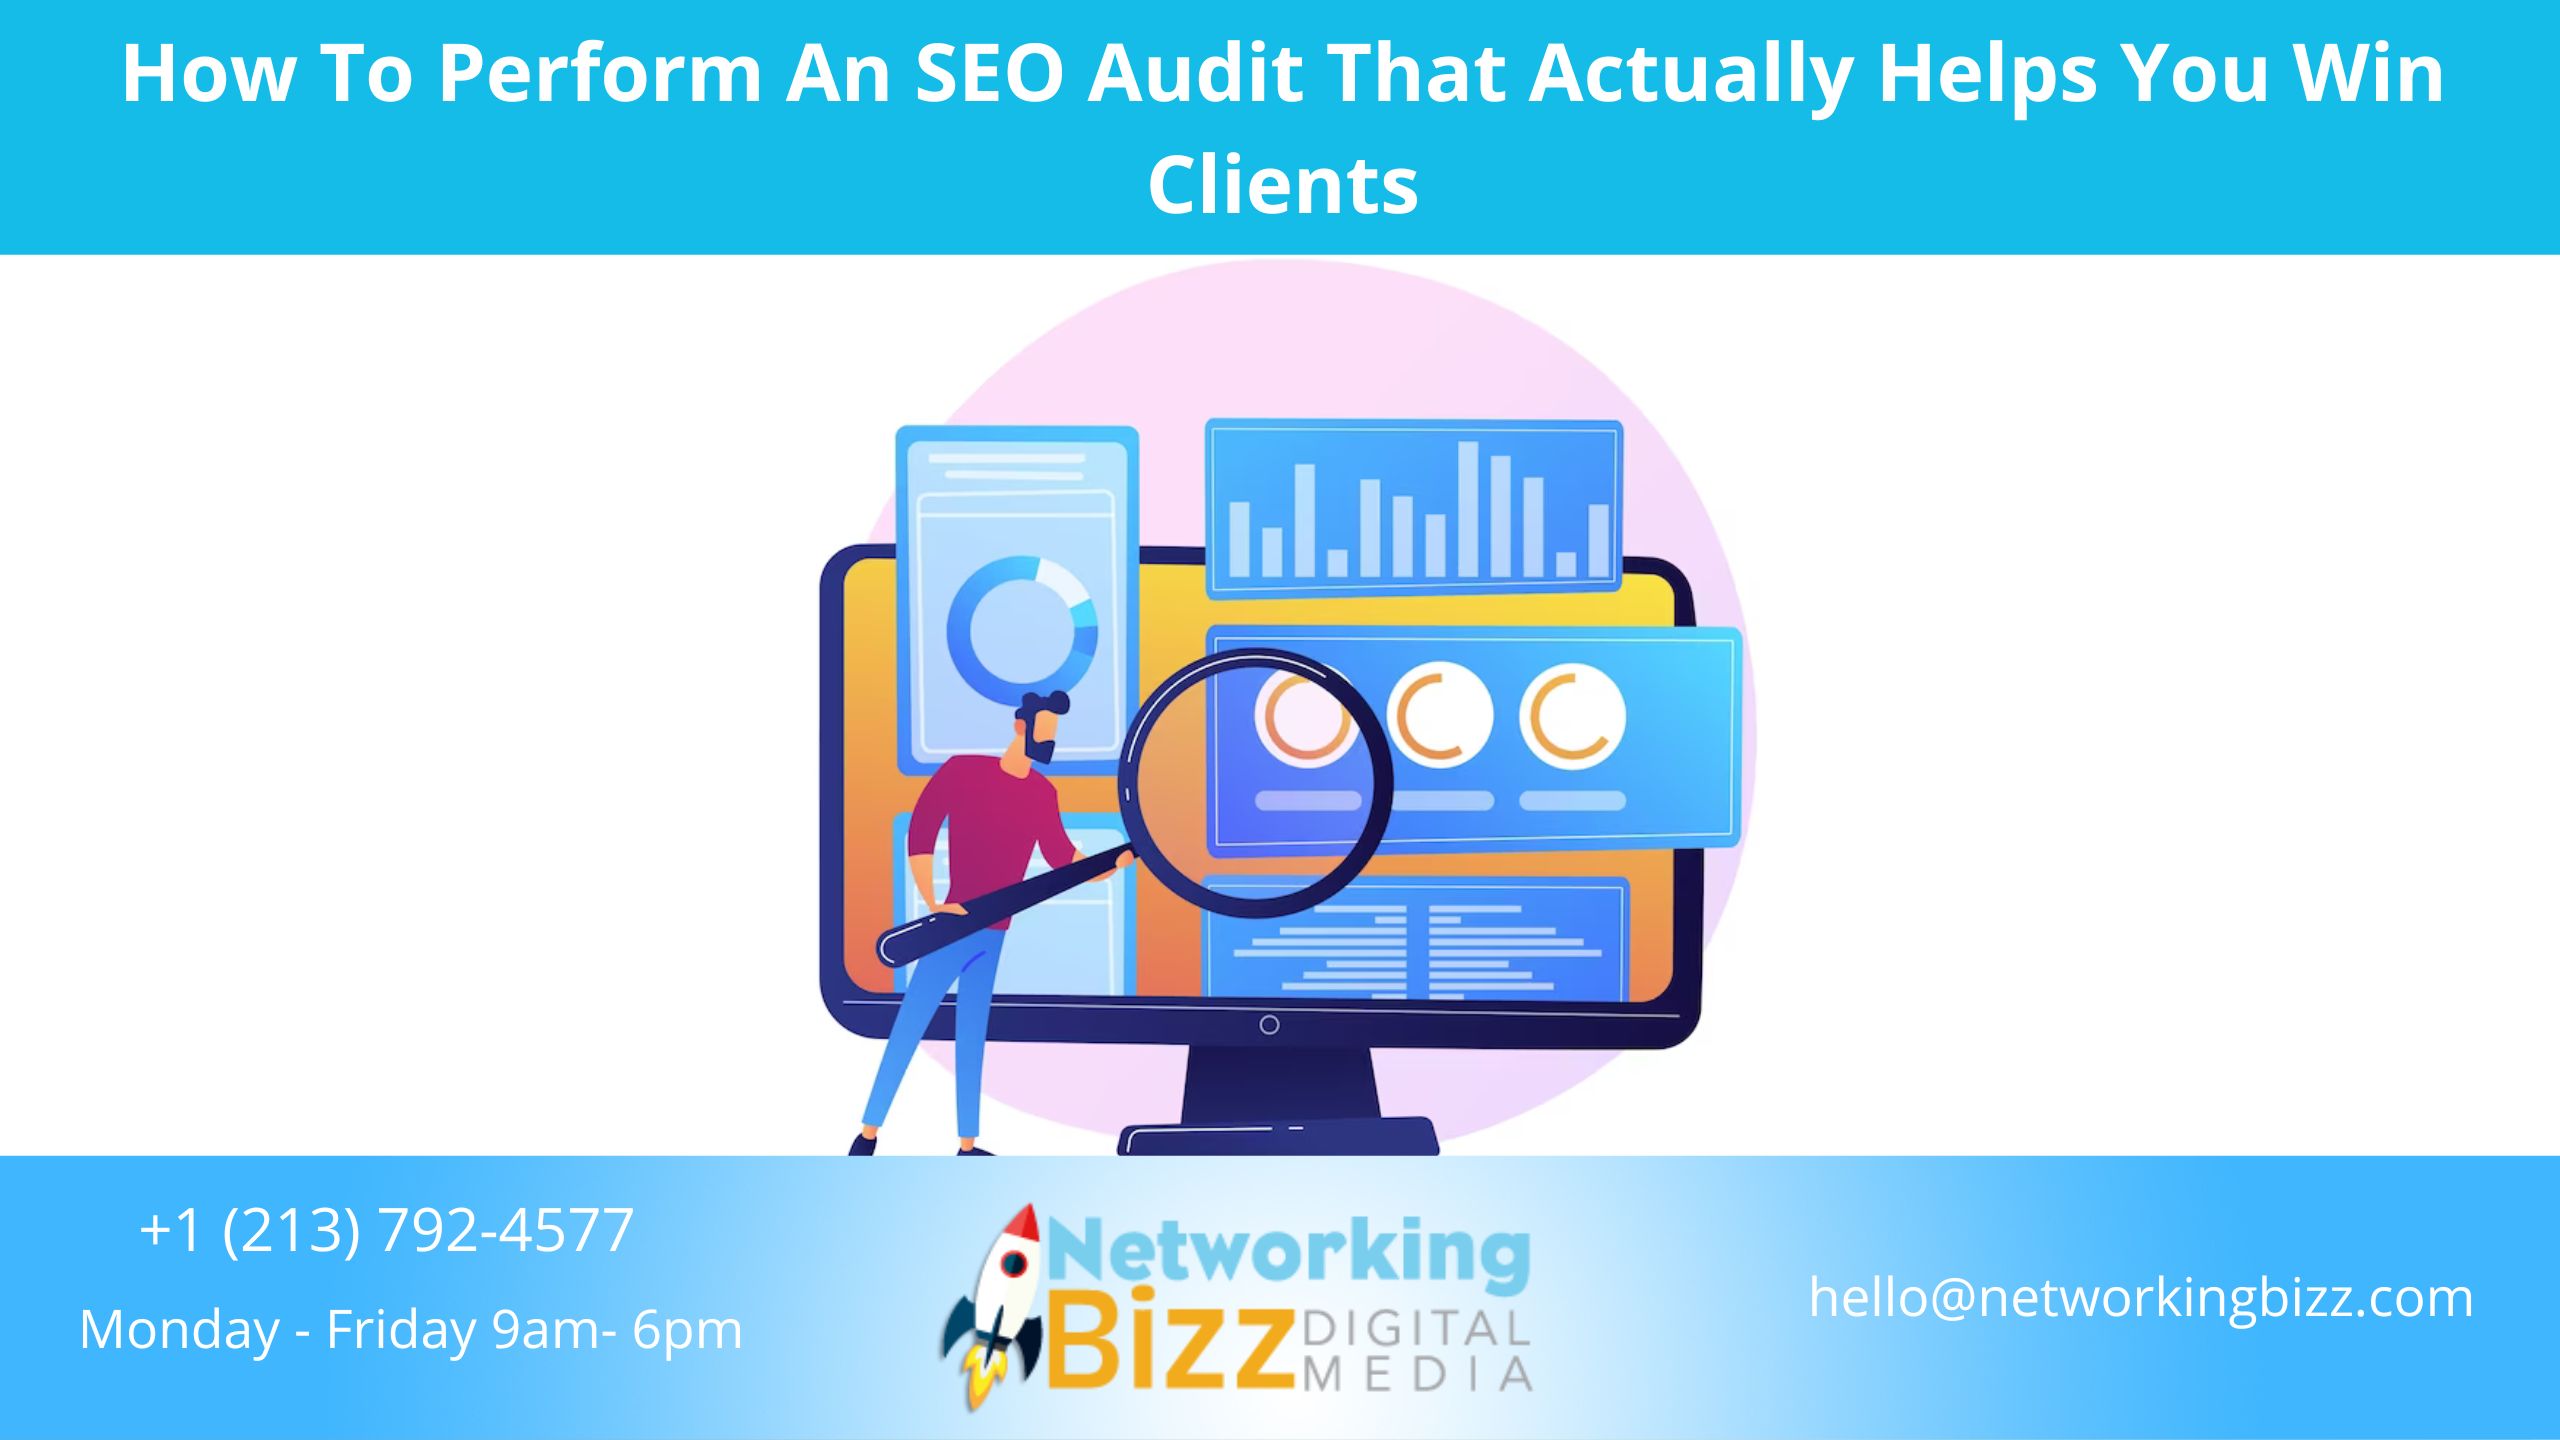 How To Perform An SEO Audit That Actually Helps You Win Clients